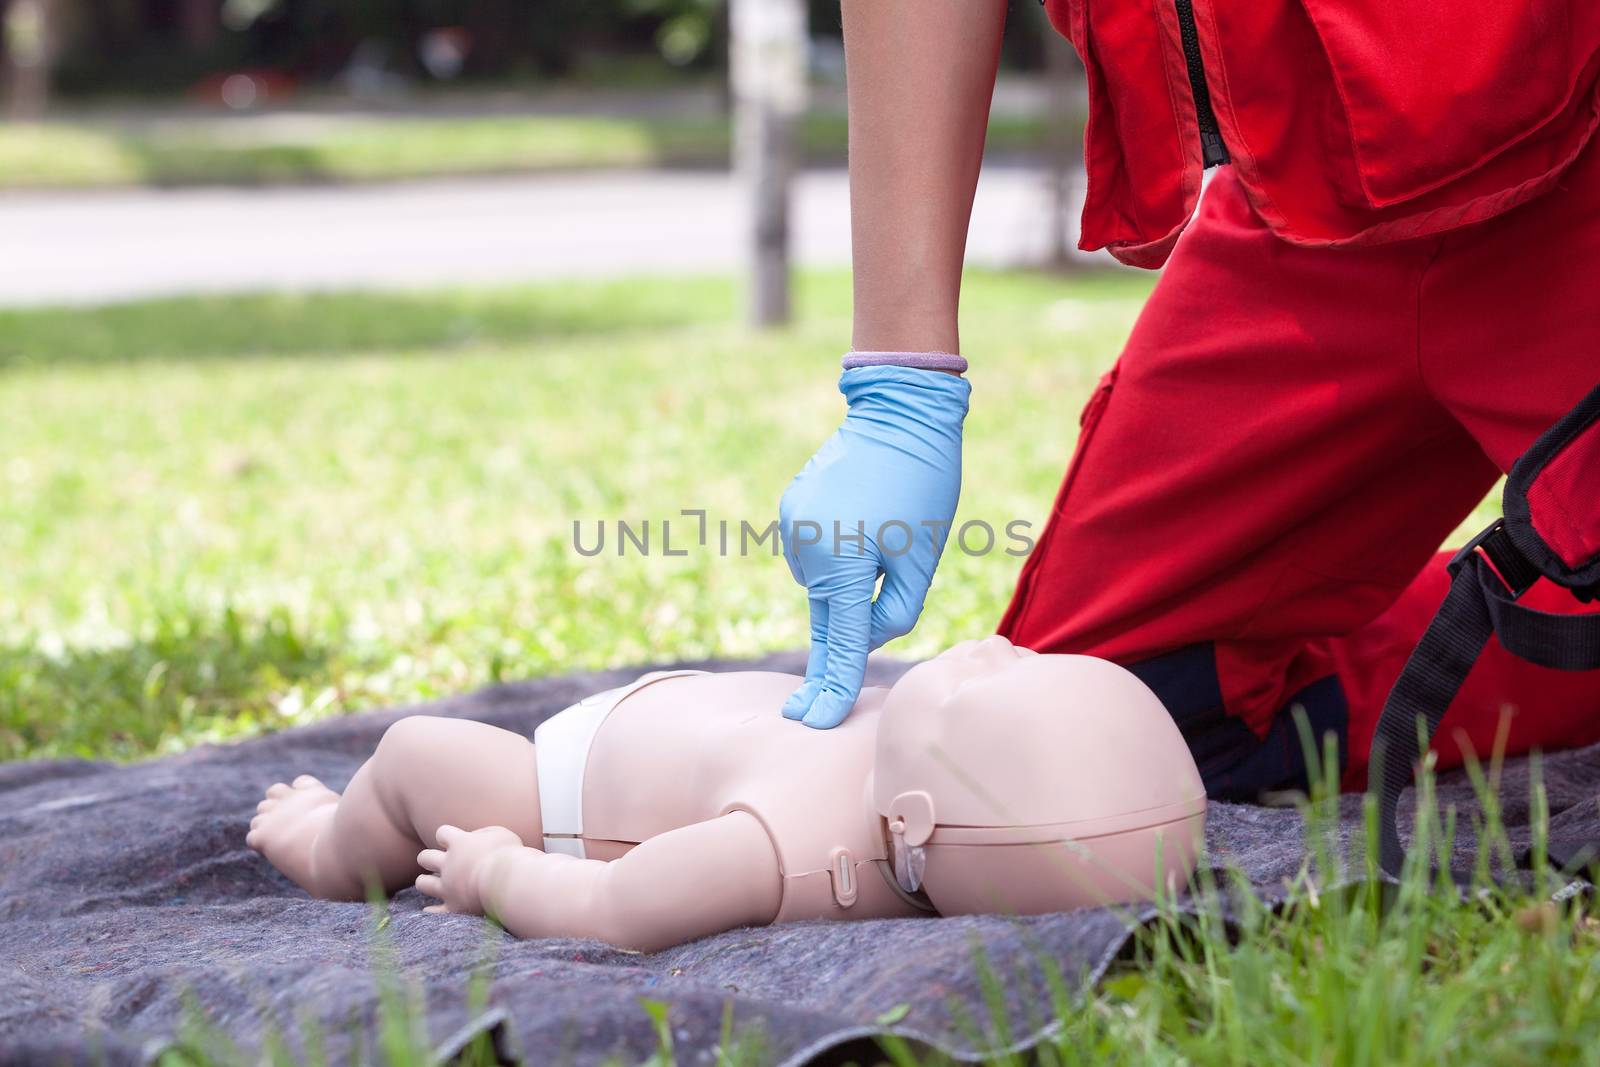 Baby CPR dummy first aid training. Cardiopulmonary resuscitation by wellphoto